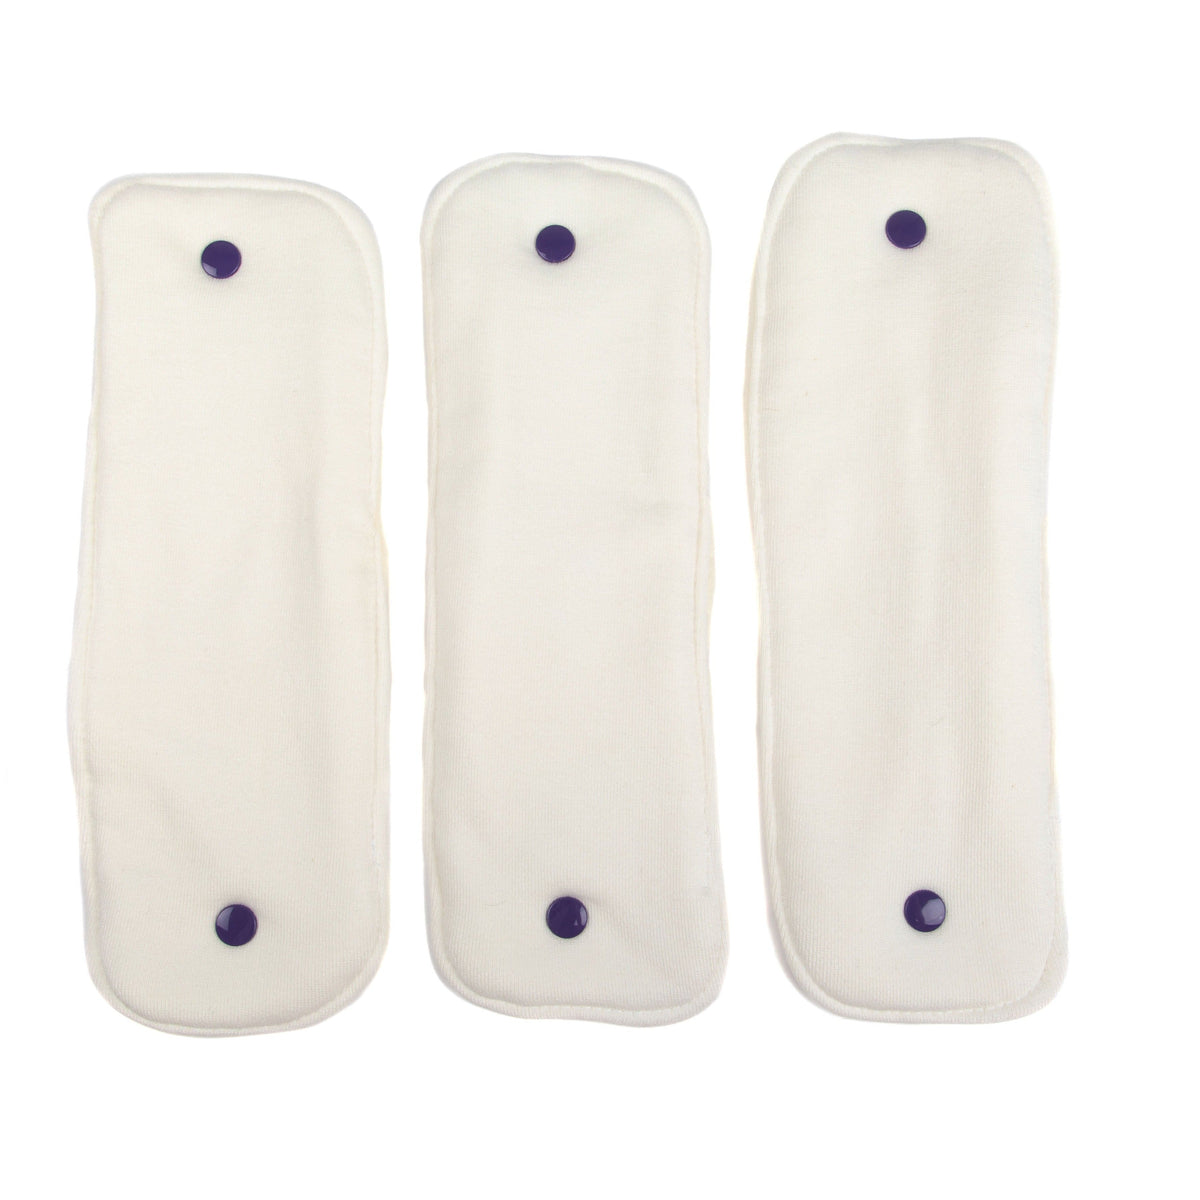 Dundies Belly Band Insert 3 Pack-Dundies Australia - Vet Recommended Pet Nappies